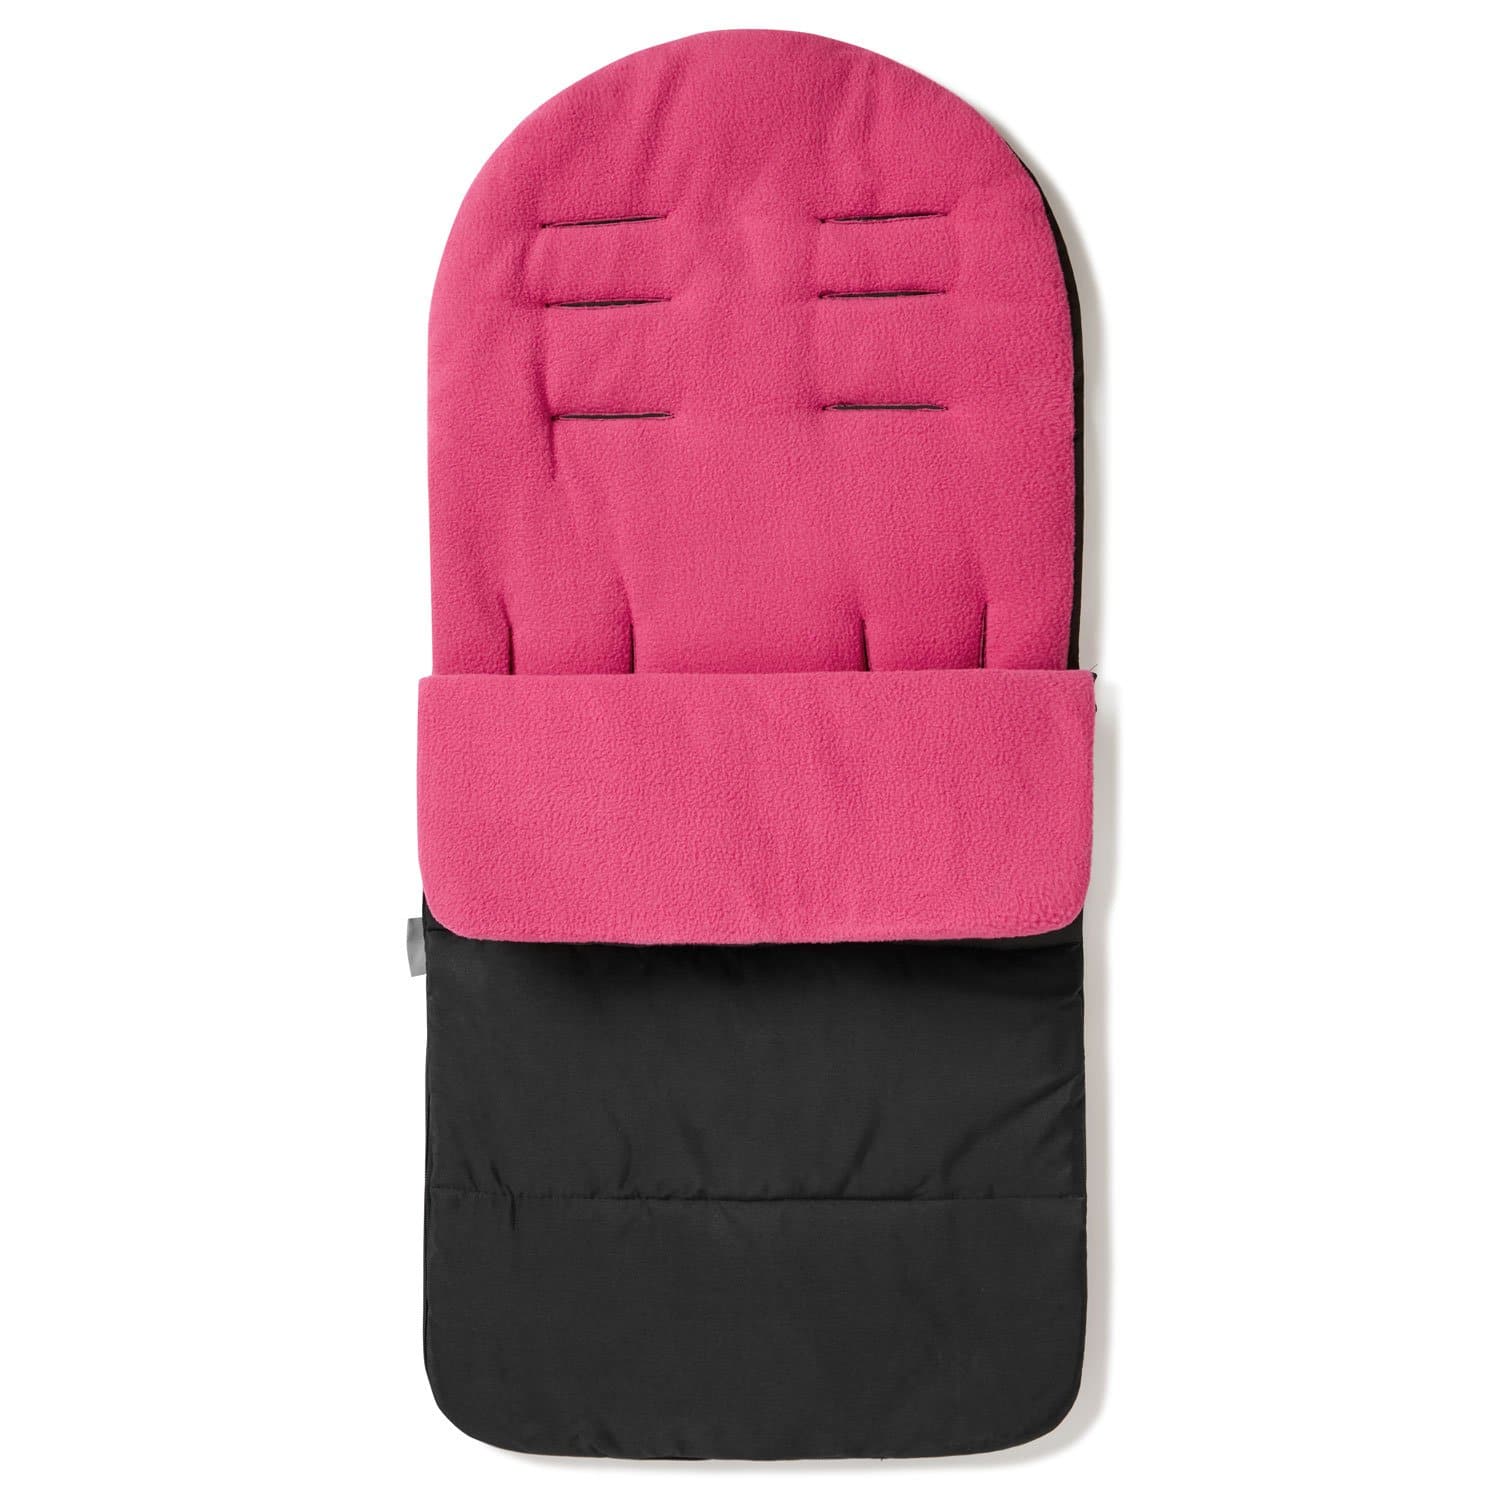 Premium Footmuff / Cosy Toes Compatible with Teutonia - Pink Rose / Fits All Models | For Your Little One